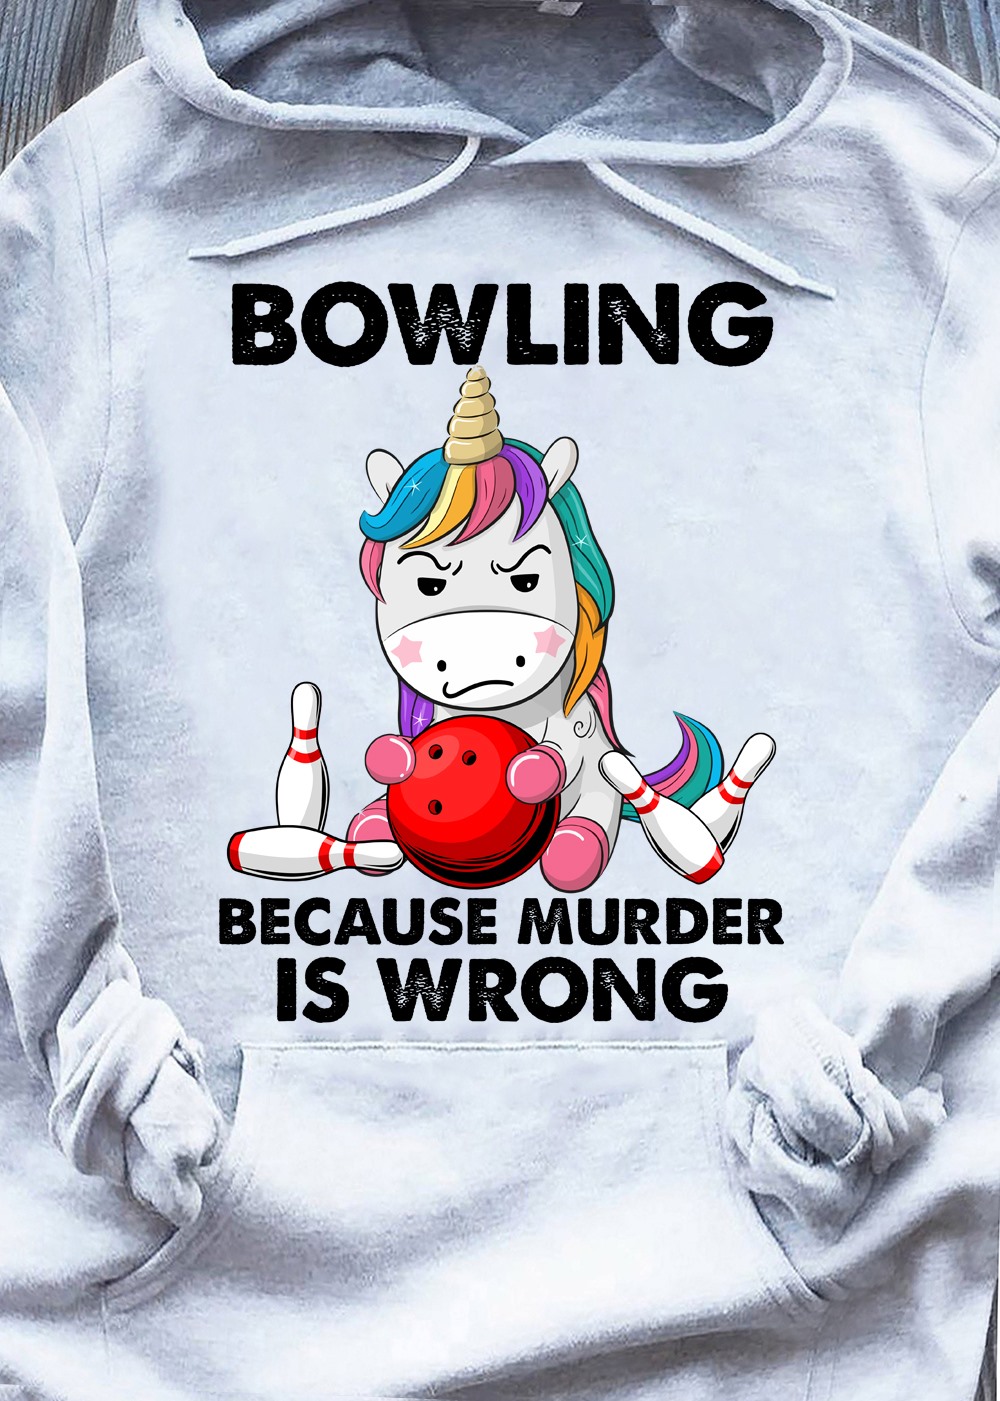 Bowling because murder is wrong